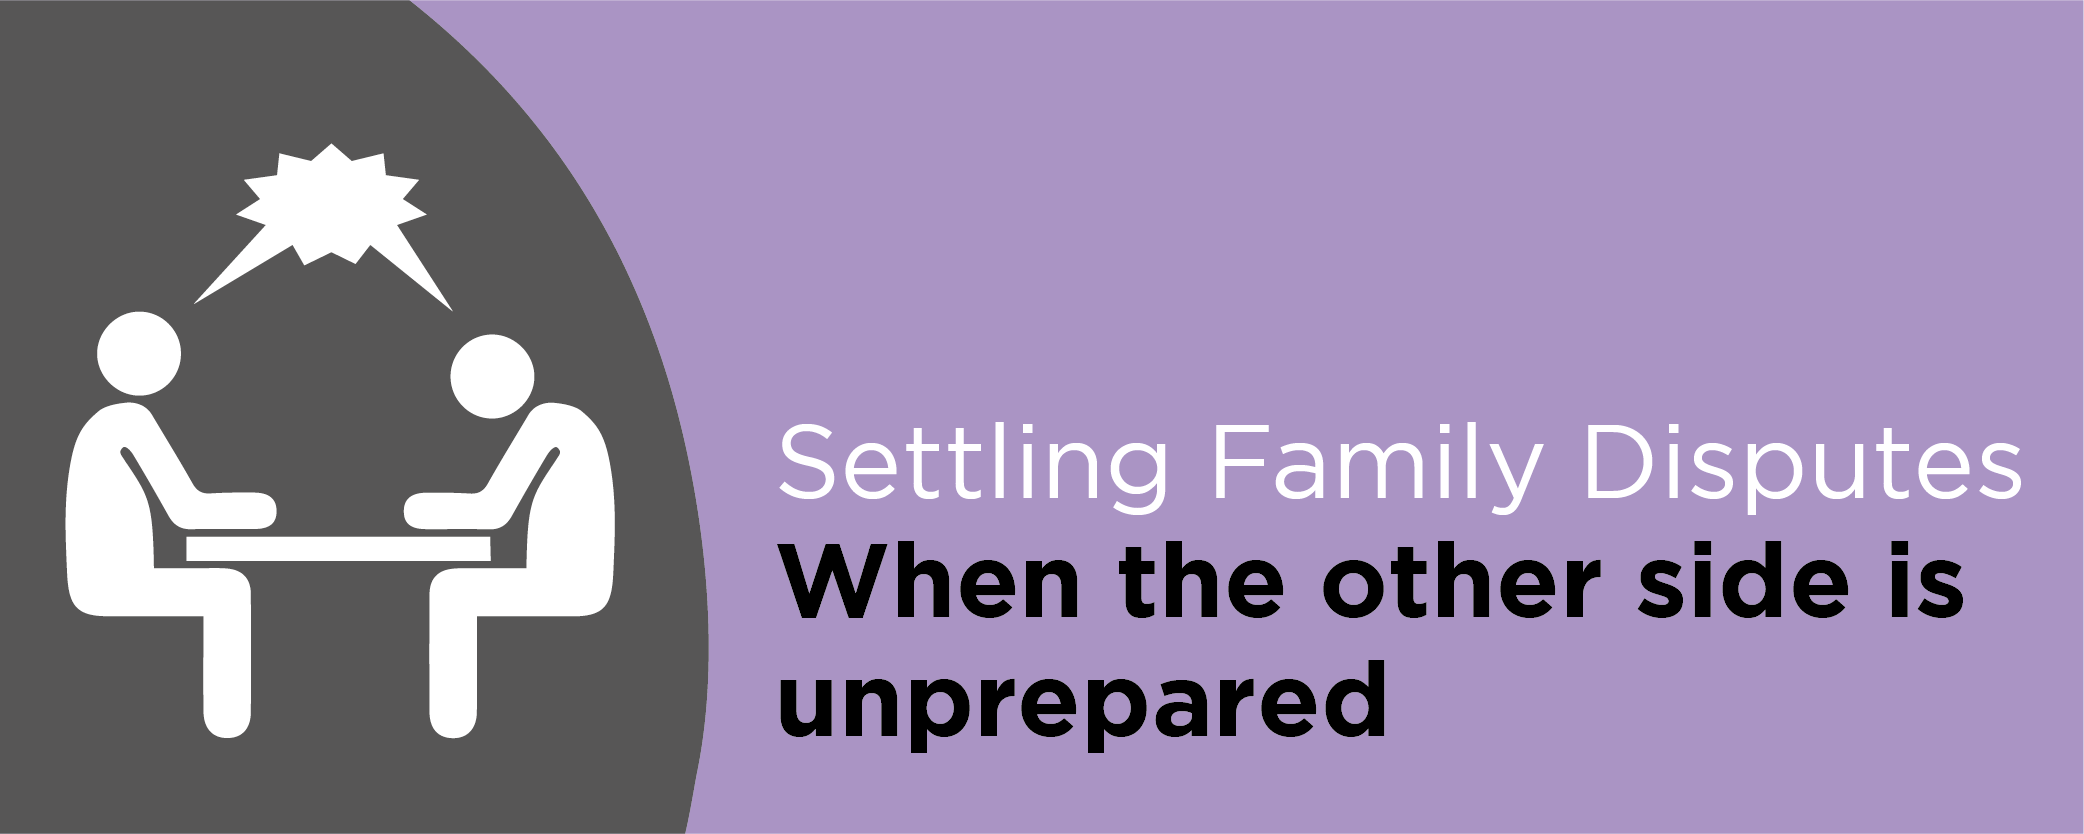 Family Disputes: When the other side is unprepared